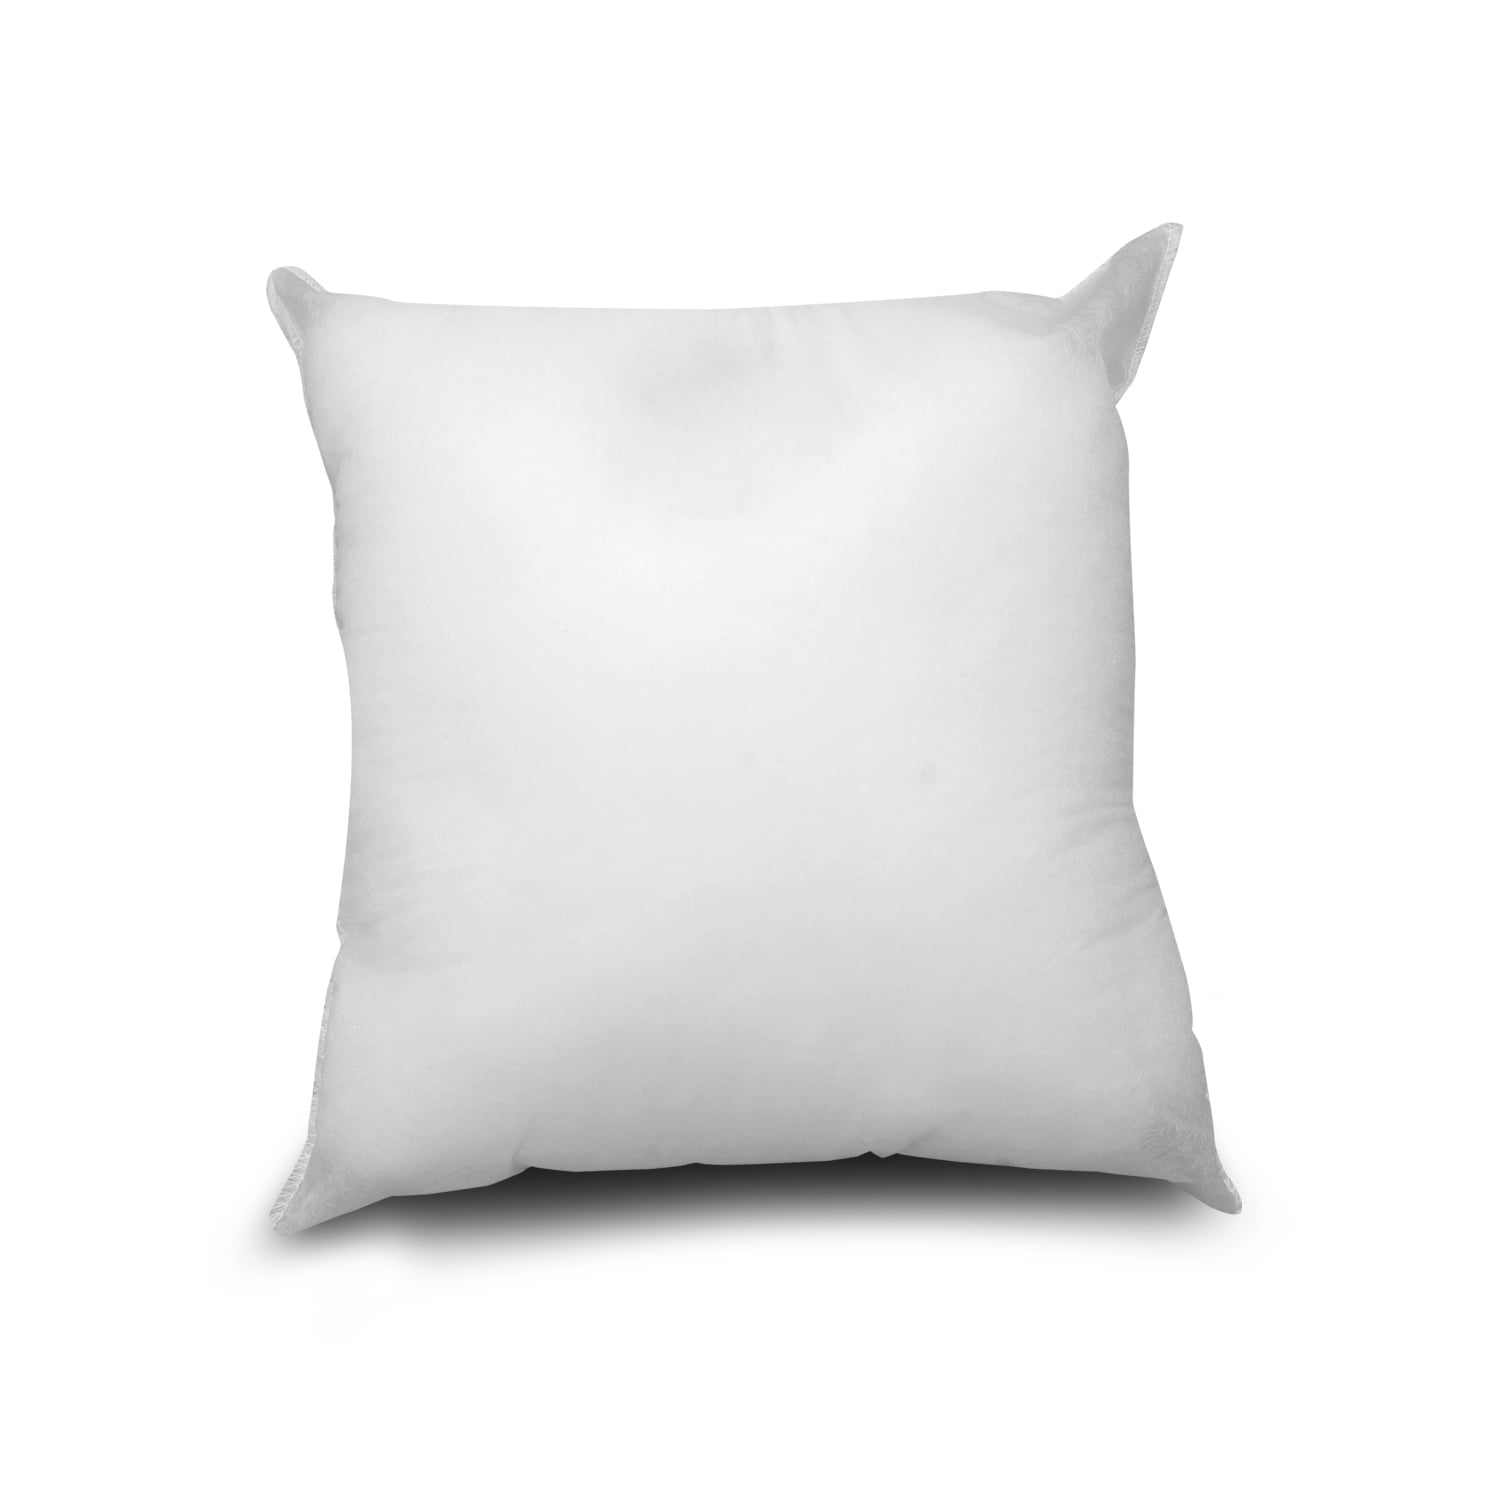 Throw Pillow Insert 18x18 Set of 2 pc. Square Sham Stuffer Insert for  Decorative Pillow Covers by Looms & Linens - Made in USA